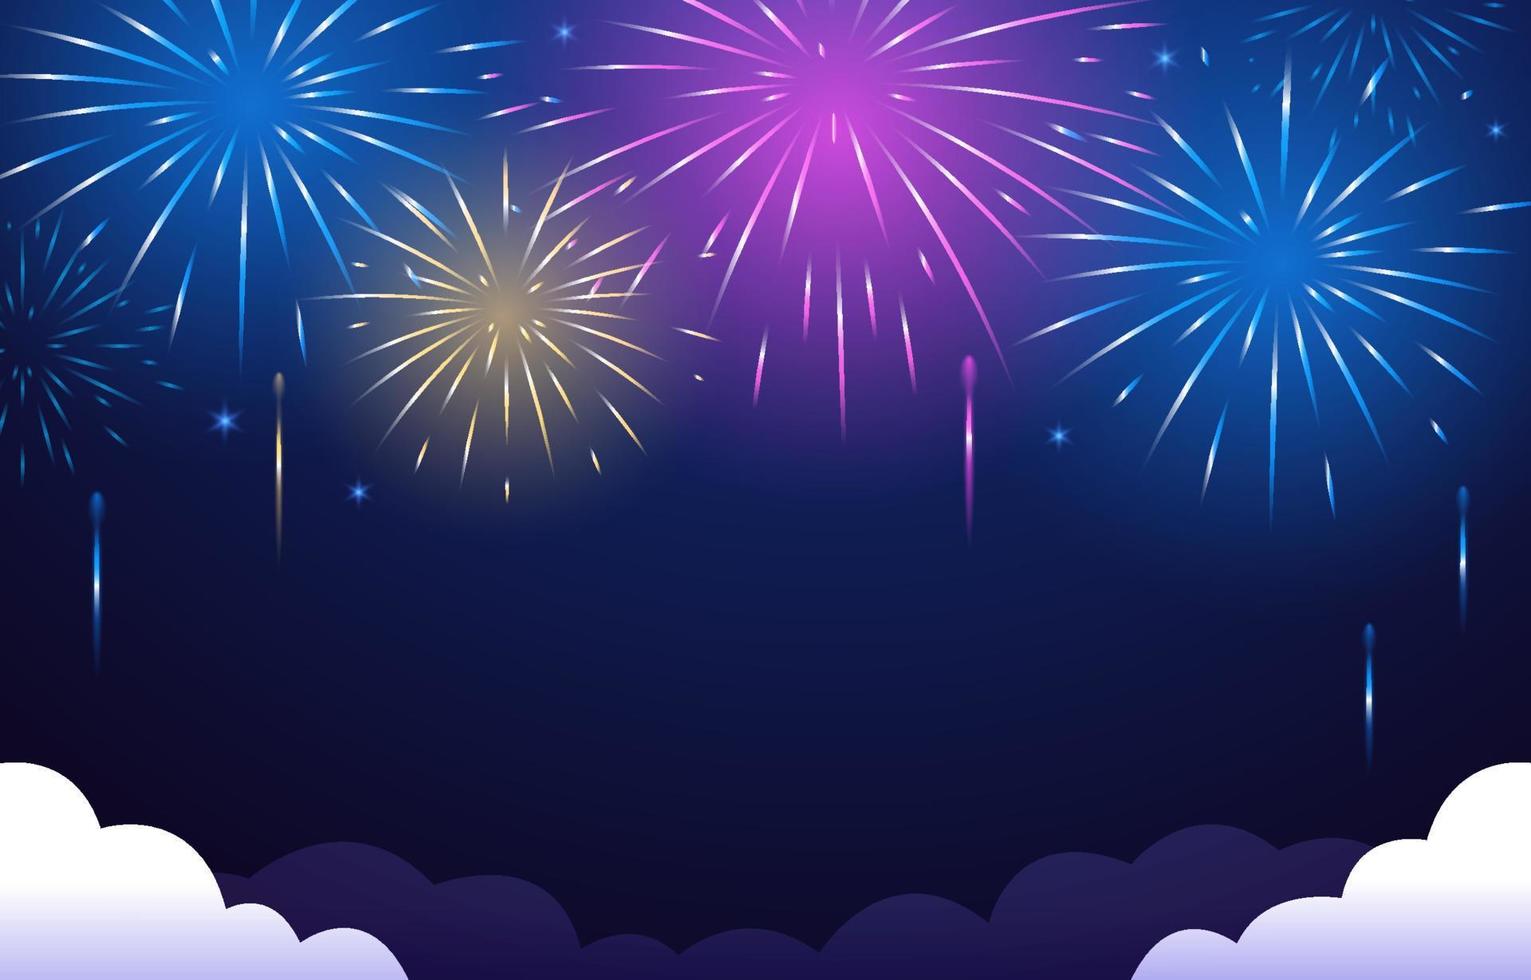 Fireworks in The Night Background vector